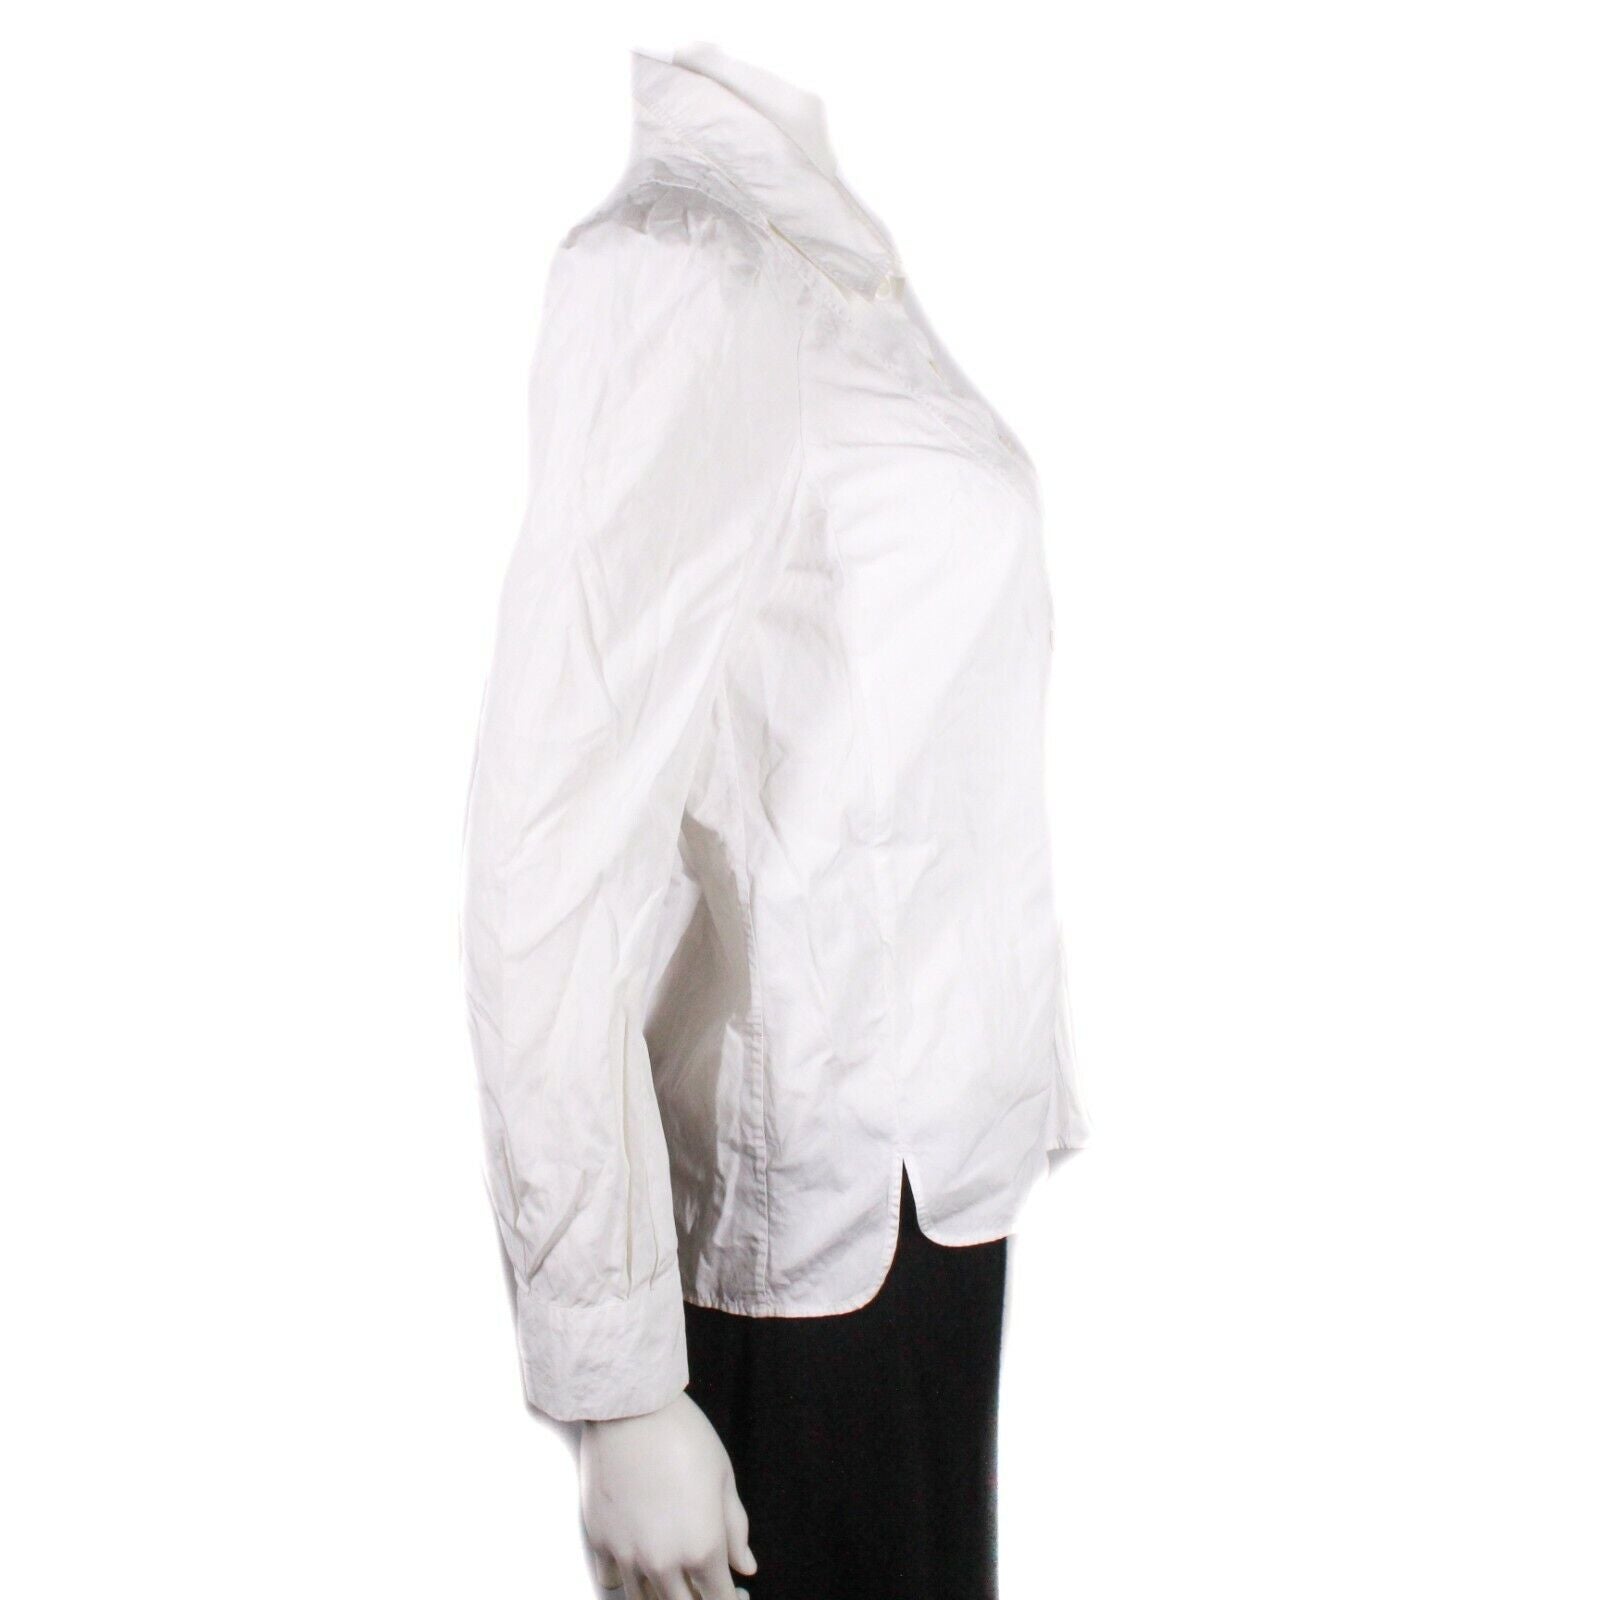 Louis Vuitton - Authenticated Jacket - Cotton White for Women, Very Good Condition